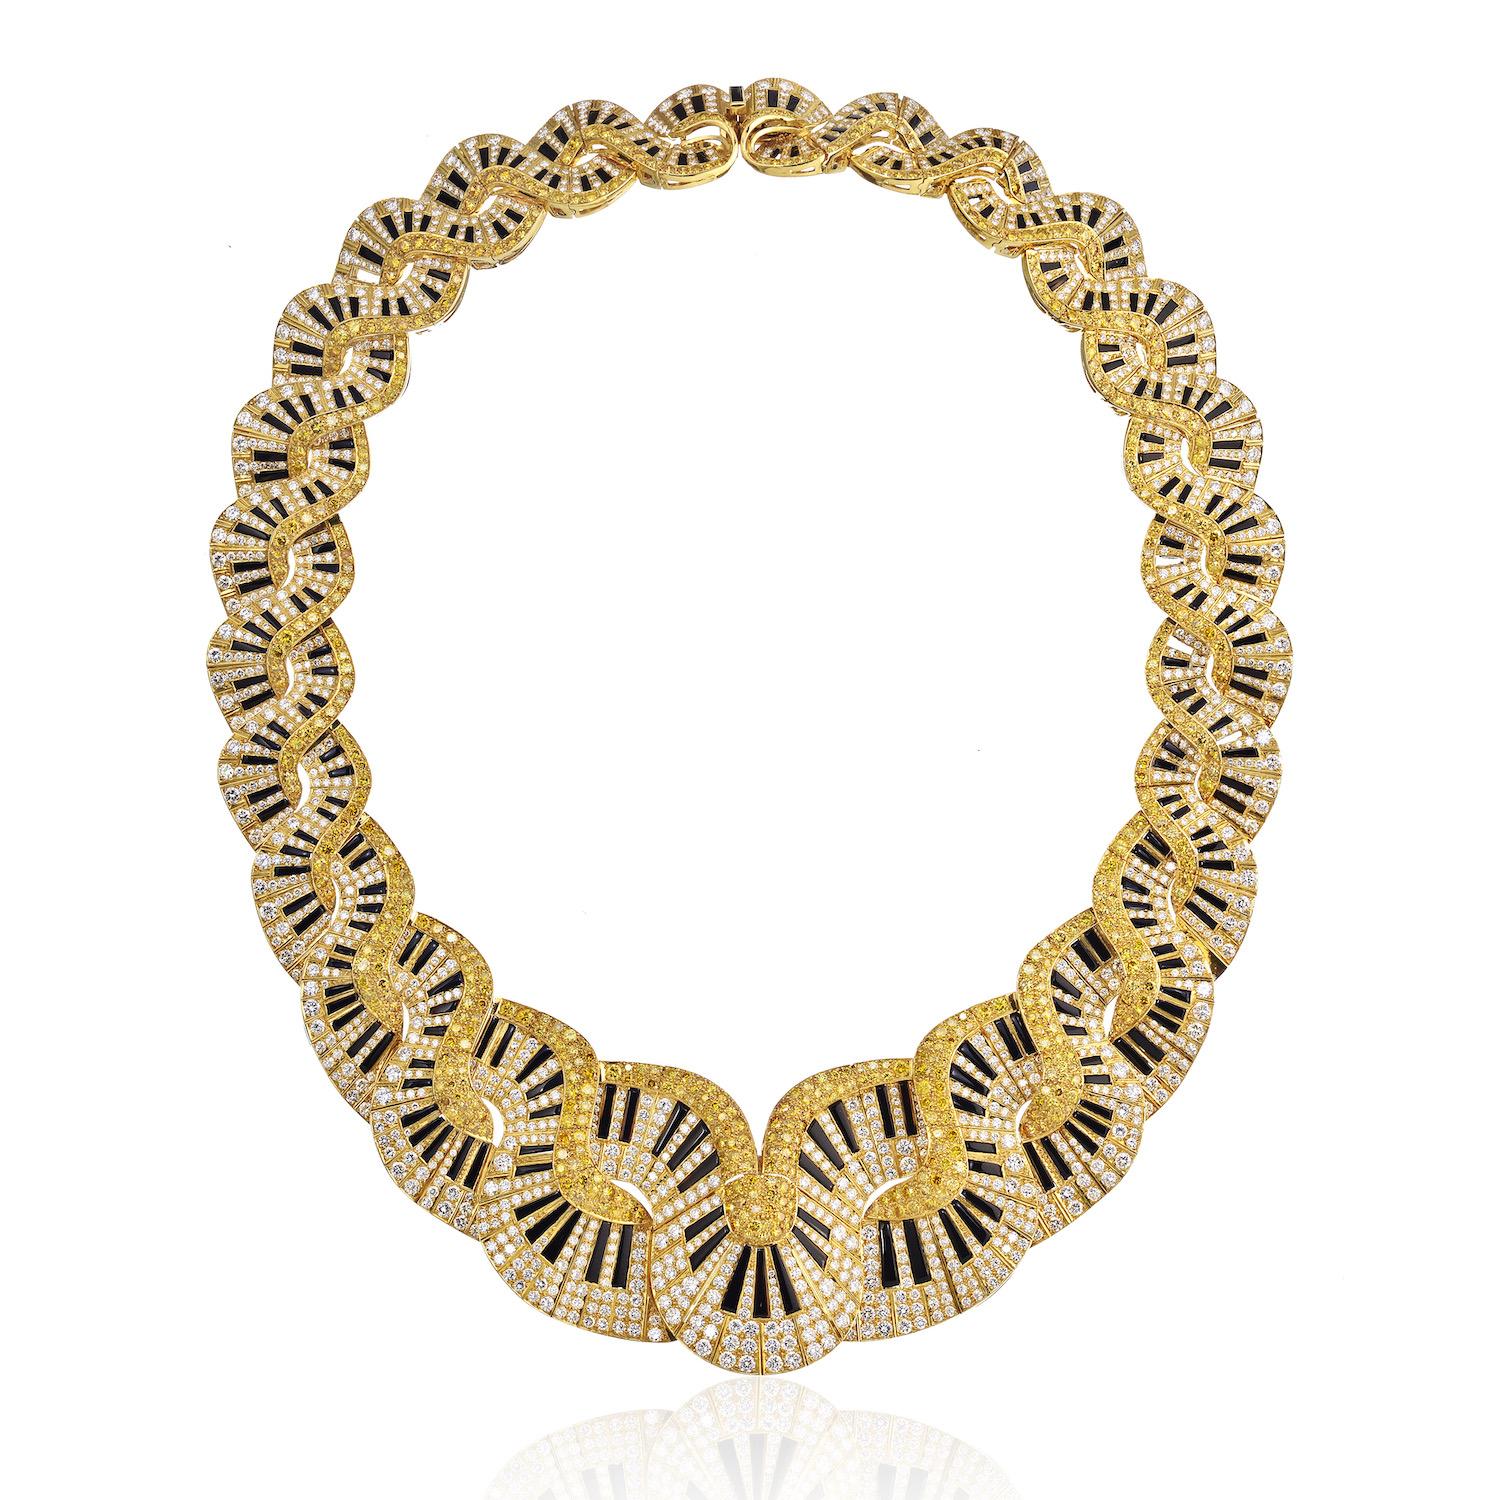 Wearing statement necklaces can enhance your wardrobe and transform your outfits.

Glamorous diamond bib necklace encrusted with white and yellow diamonds with black onyx piano keys. Crafted in 18K Yellow Gold.

This necklace is flat to the neck and